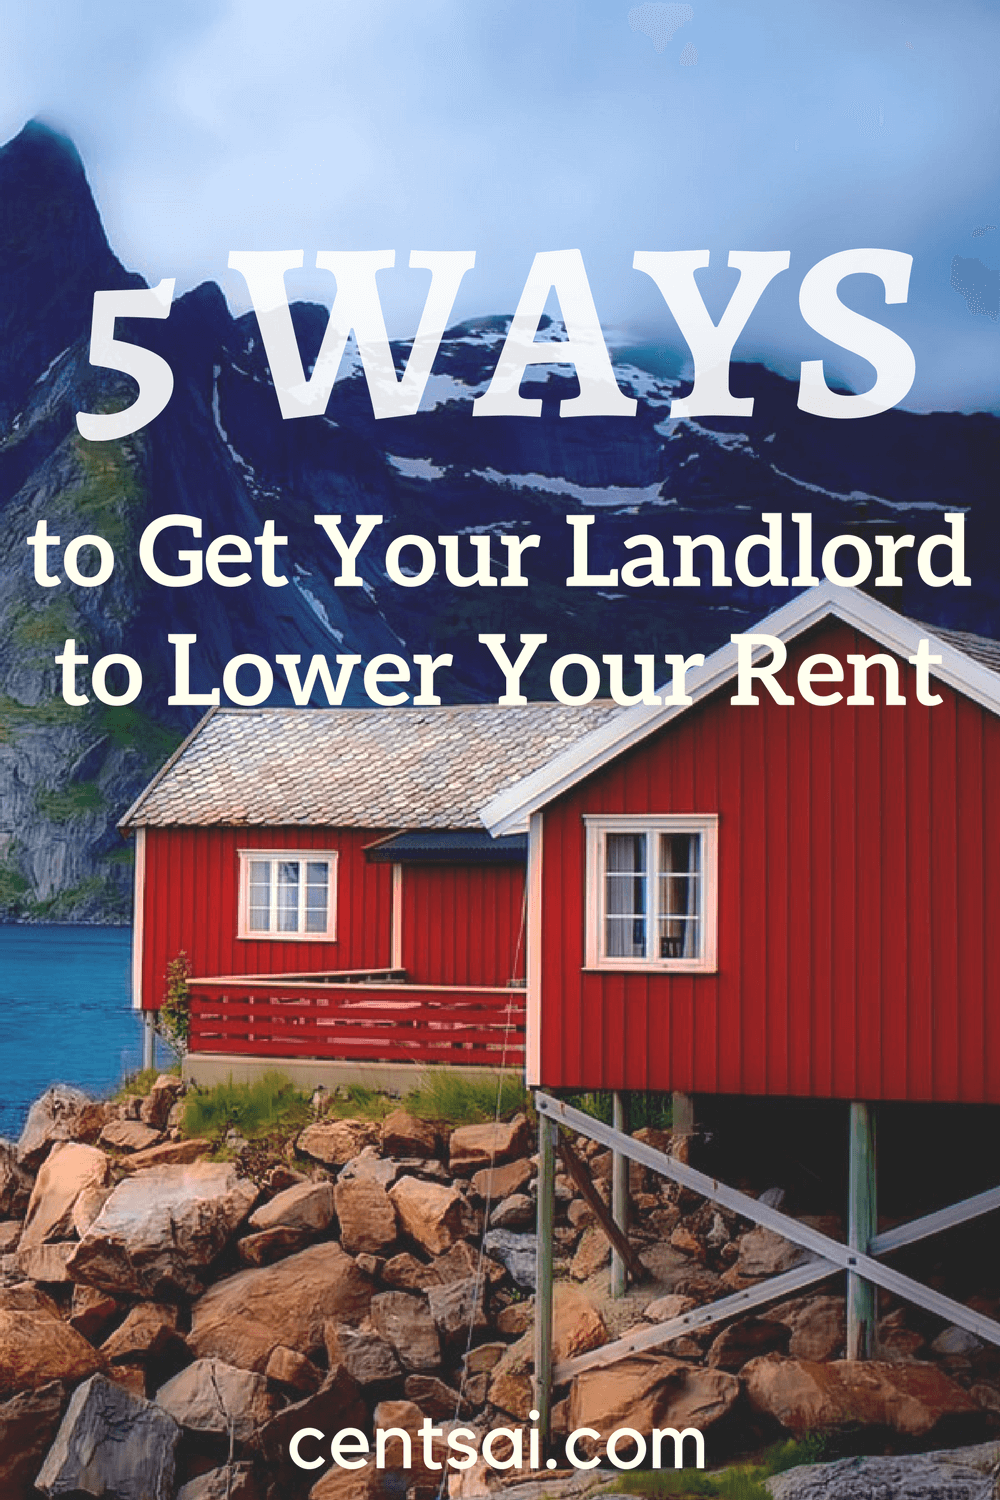 5 Ways to Get Your Landlord to Lower Your Rent. Renting may be cheaper than you think if you take the right approach. Check out these five ways to lower your apartment's sticker price.